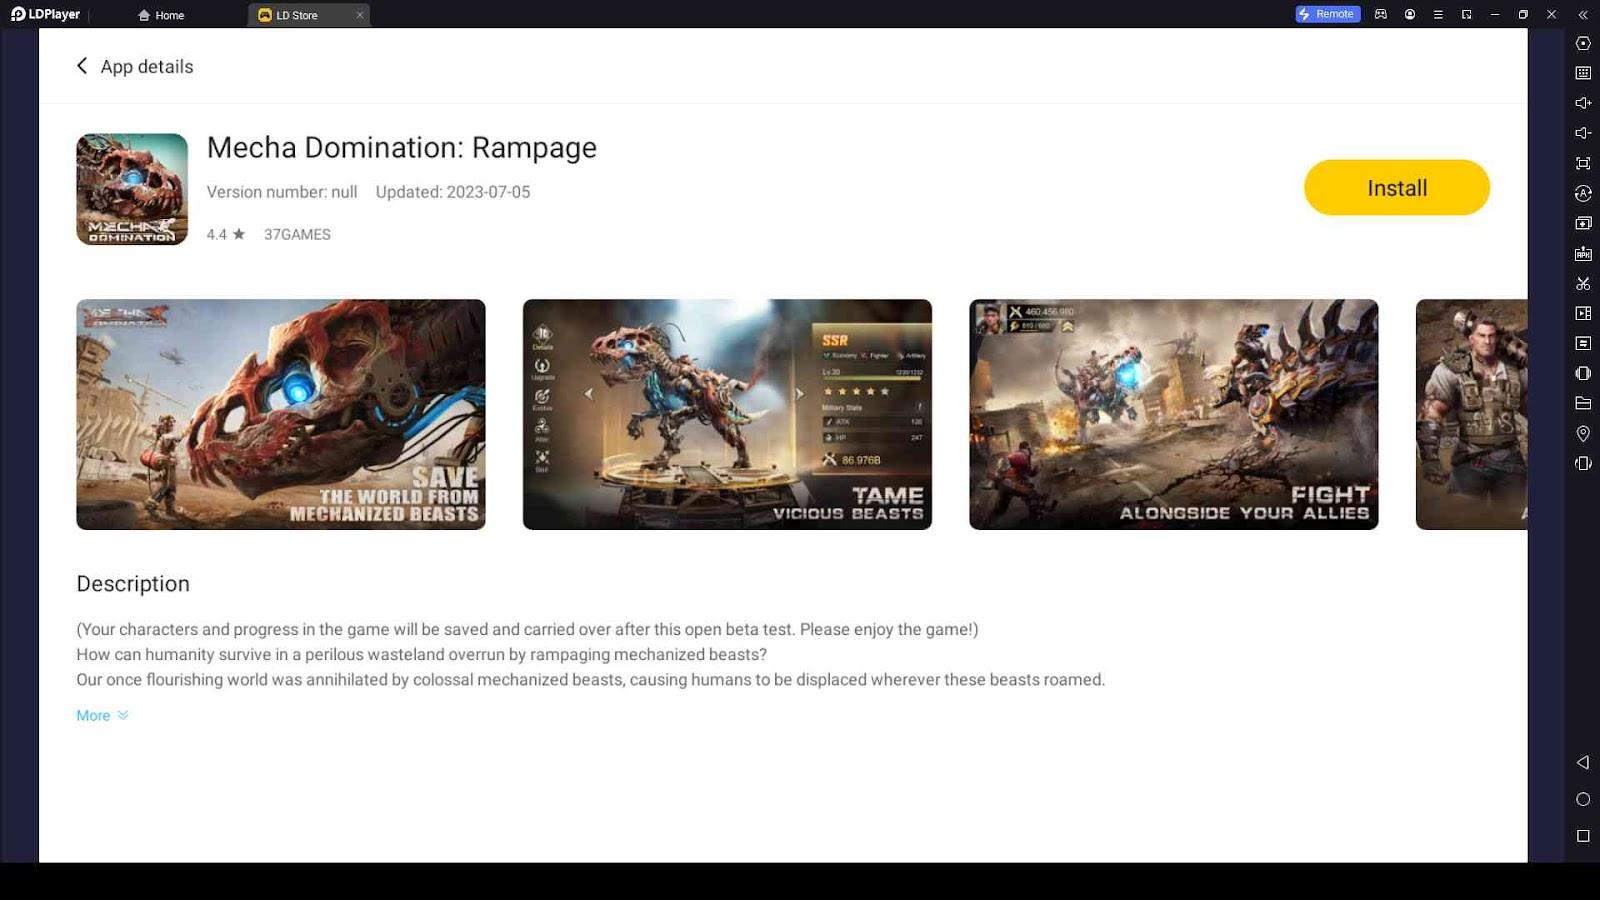 How to Run Mecha Domination: Rampage on PC Using LDPlayer 9